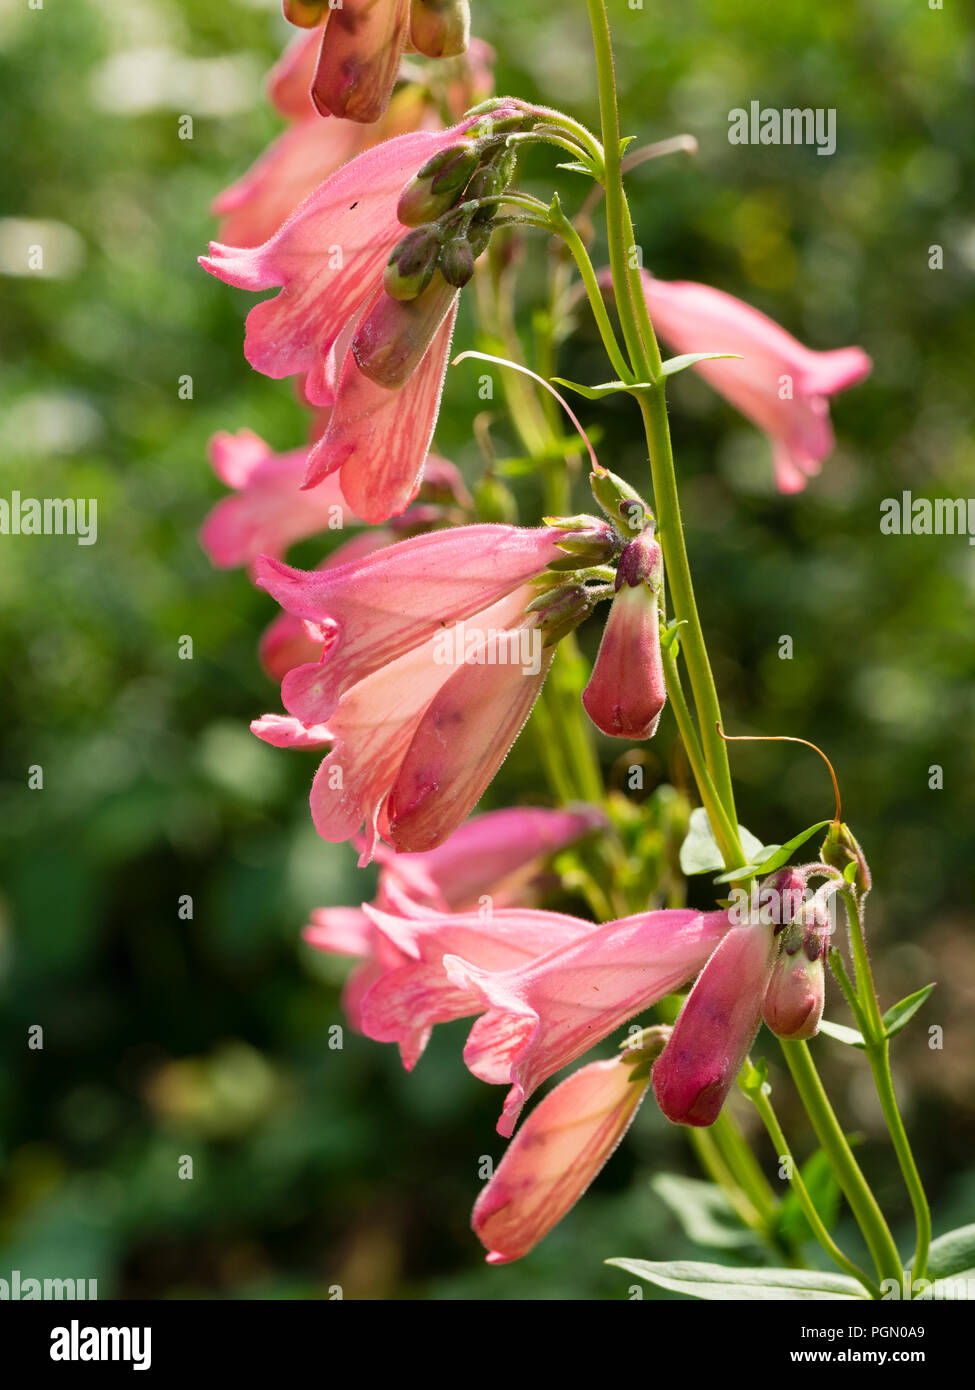 Tubular Pink Flowers Of The Summer Blooming Evergreen Perennial Sub